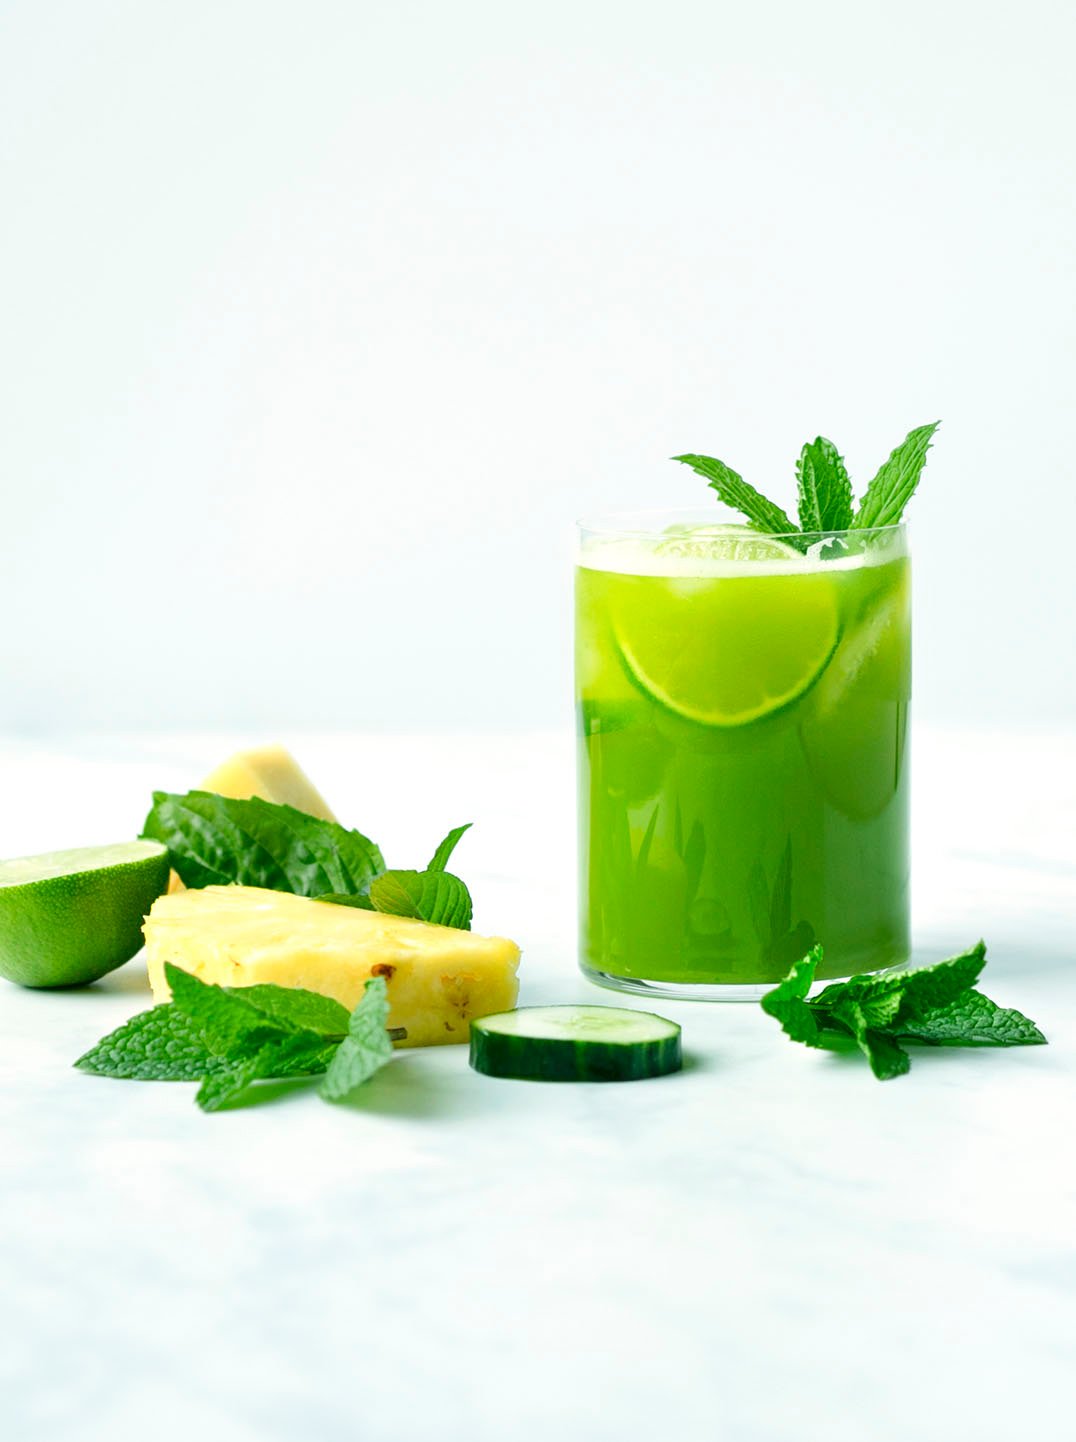 Pineapple Mint Basil Refresher green juice in a glass with lemon and mint